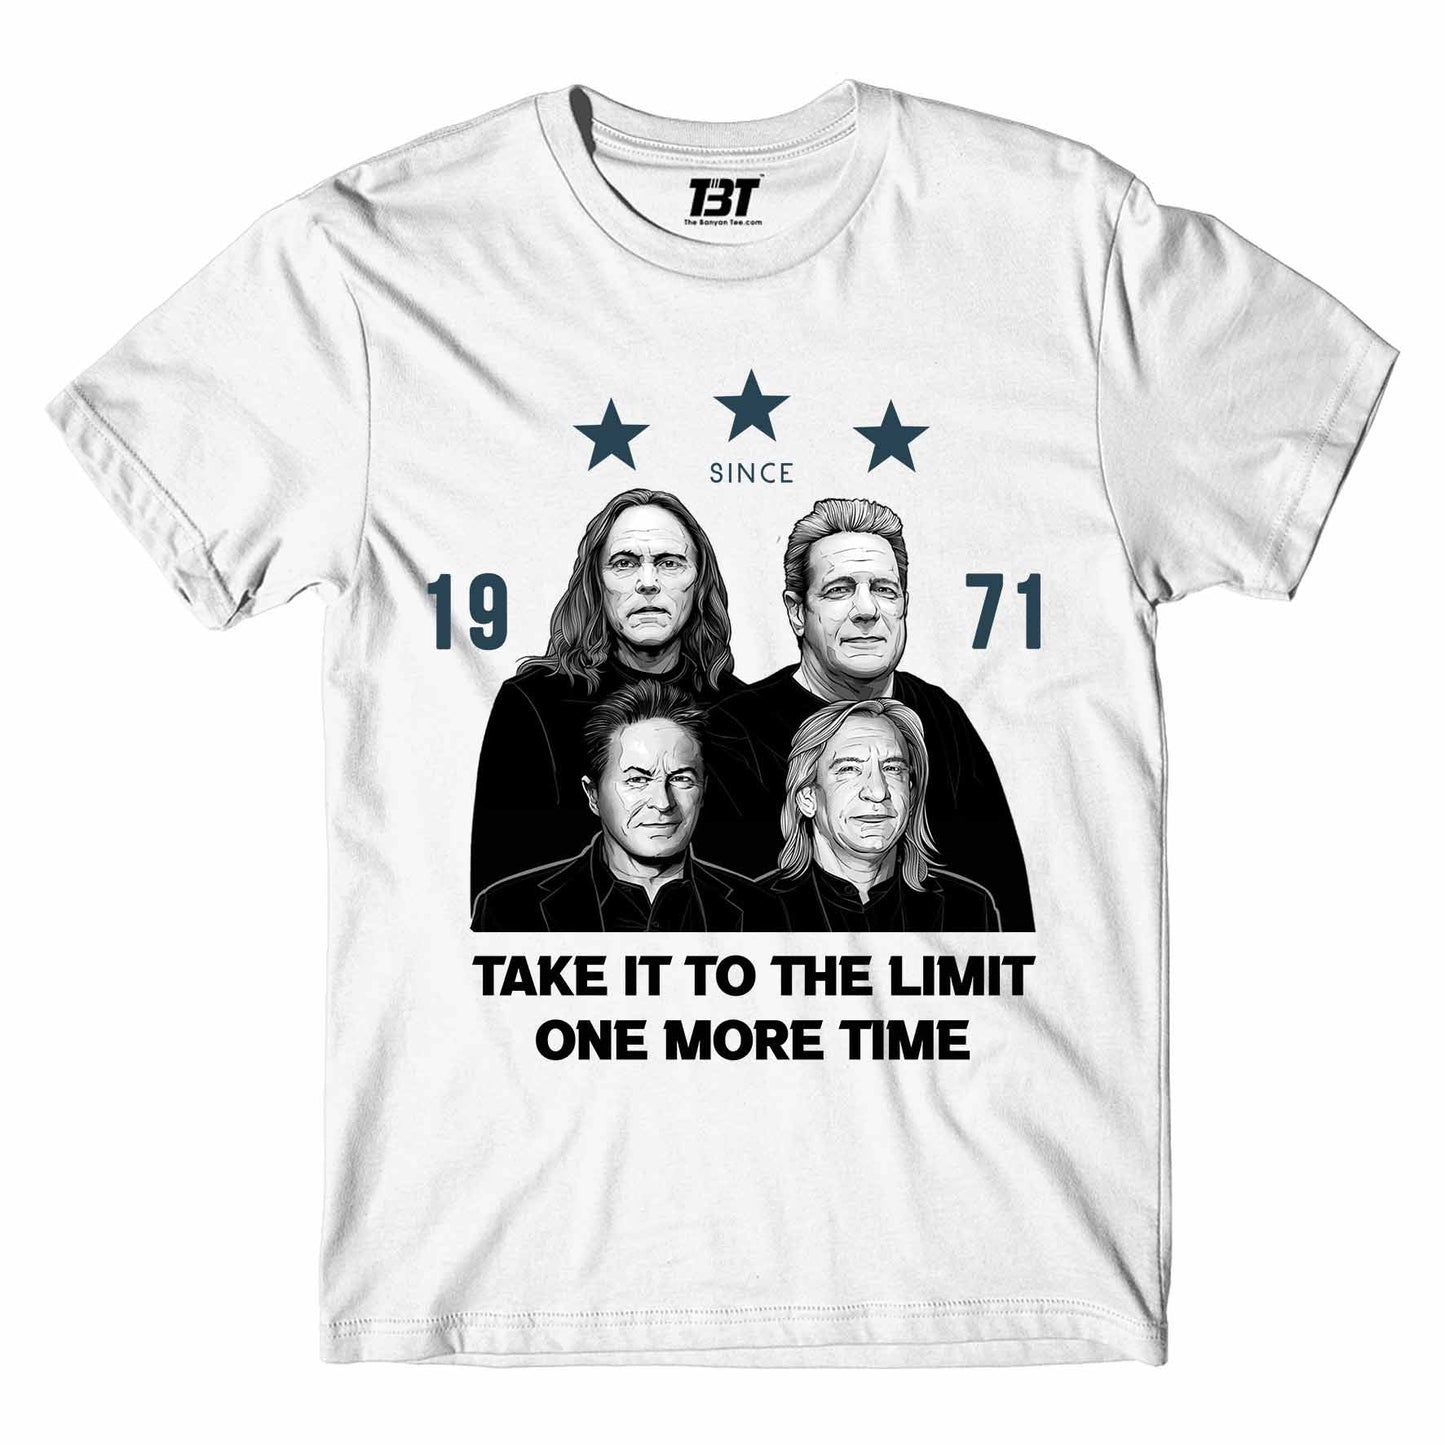 eagles take it to the limit t-shirt music band buy online india the banyan tee tbt men women girls boys unisex white